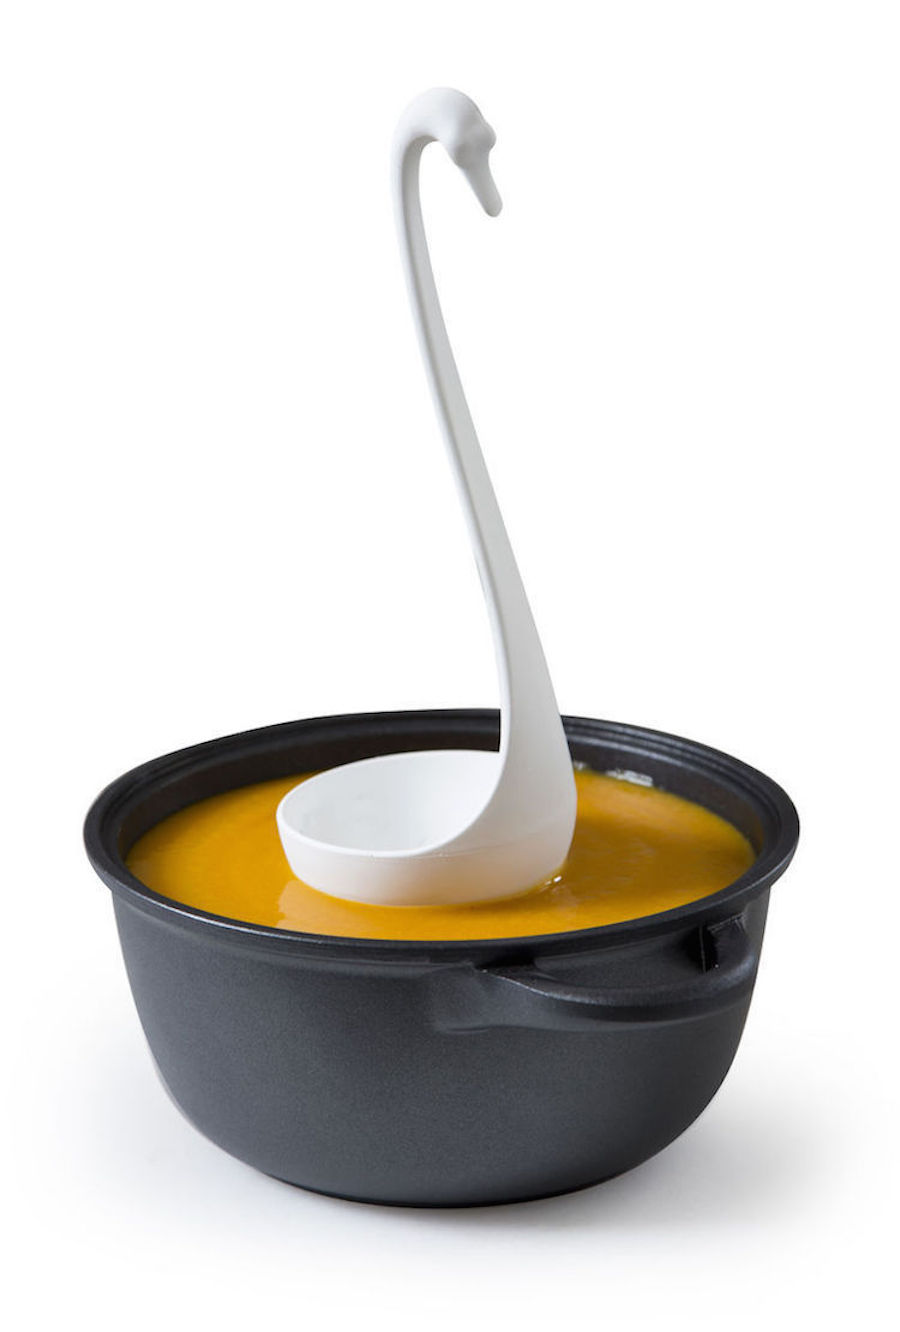 Funny Floating Swan-Shaped Ladle by OTOTO Design-2